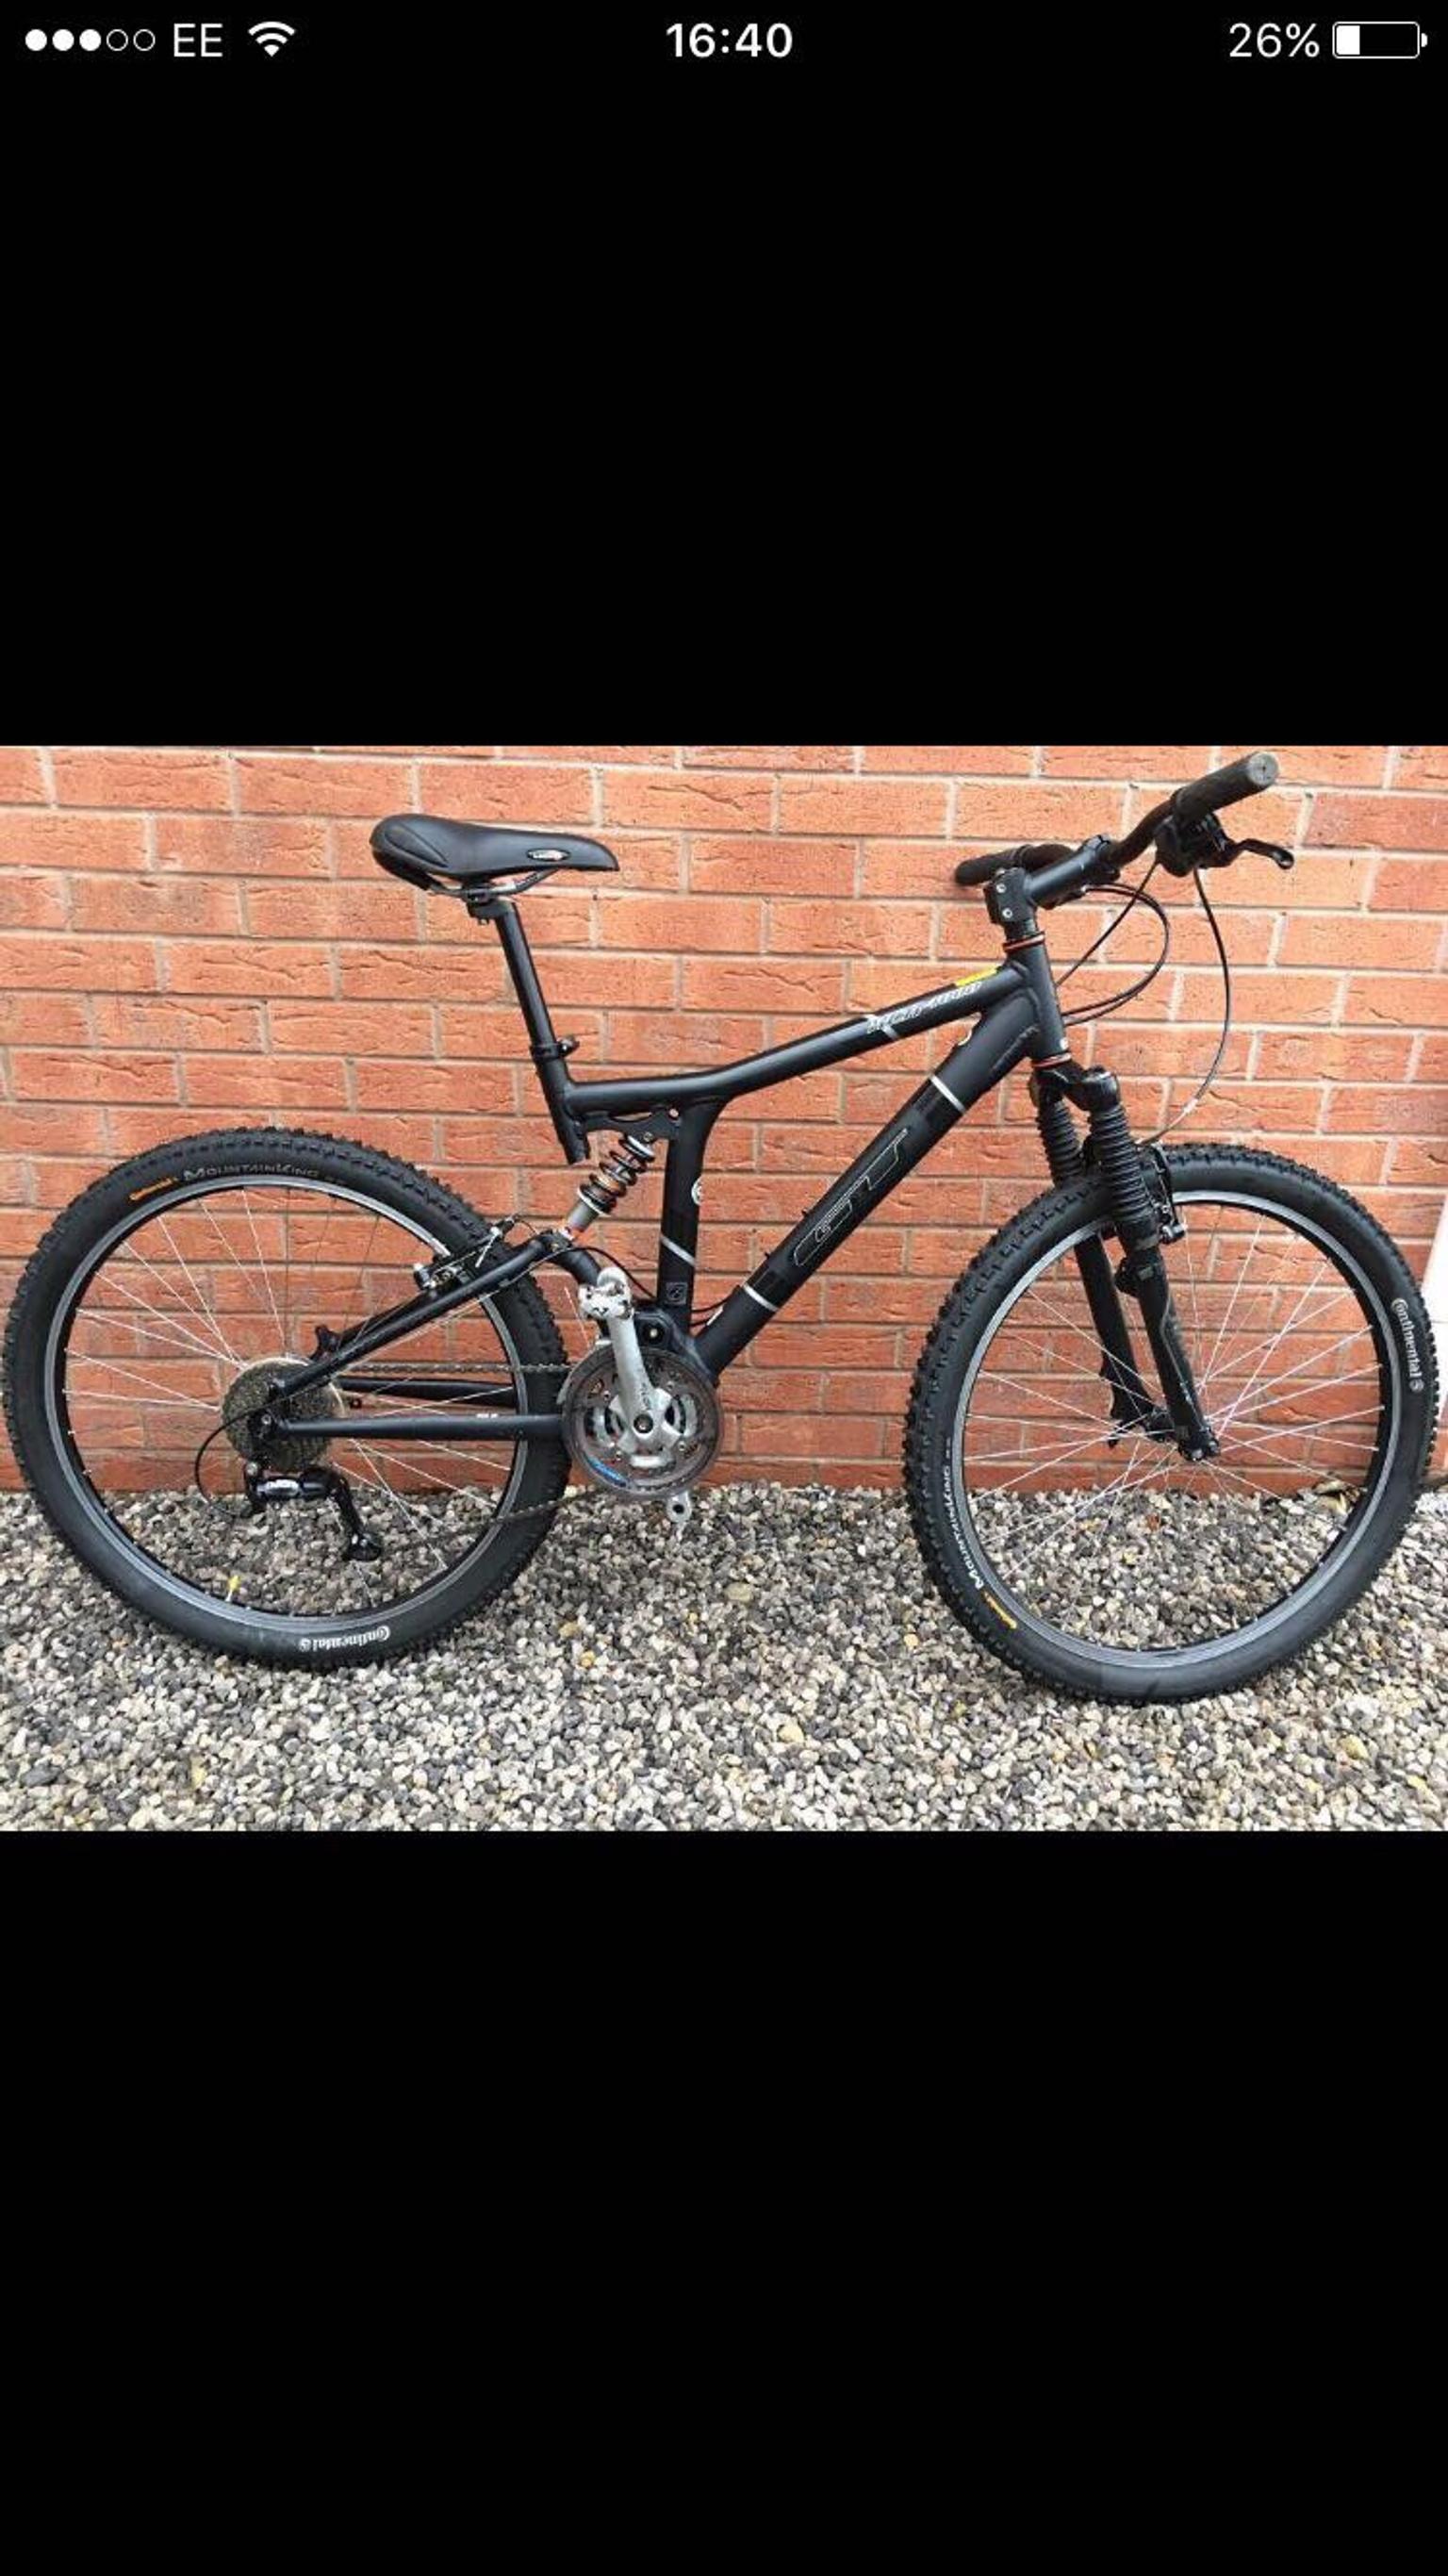 Gt Xcr 4000 Mountain Bike In S65 Rotherham For 85 00 For Sale